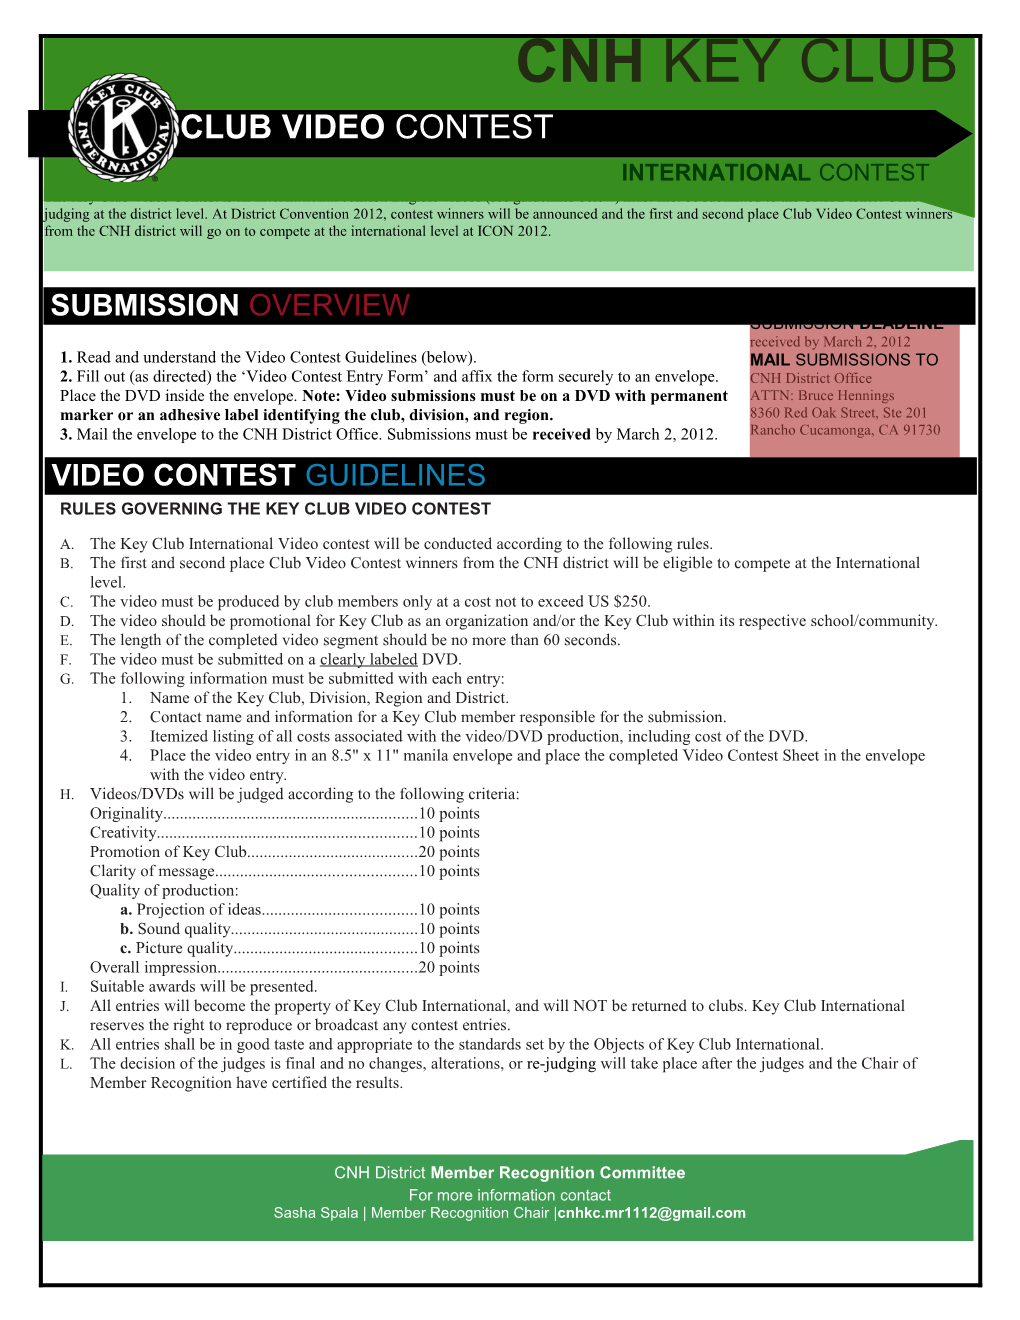 1. Read and Understand the Video Contest Guidelines (Below)